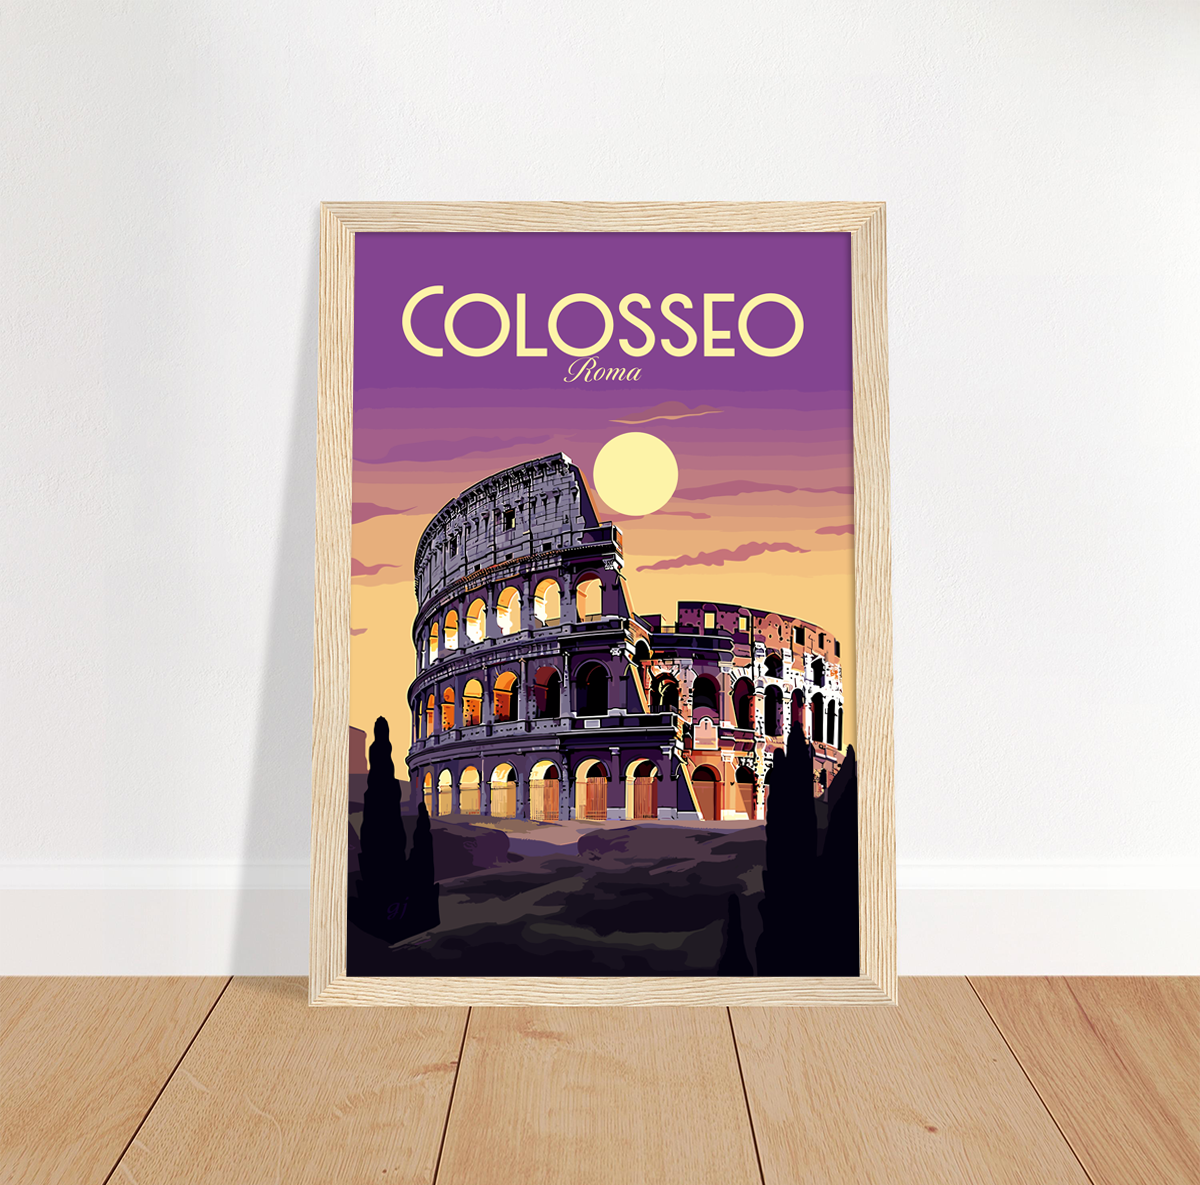 Roma - Colosseo poster by bon voyage design